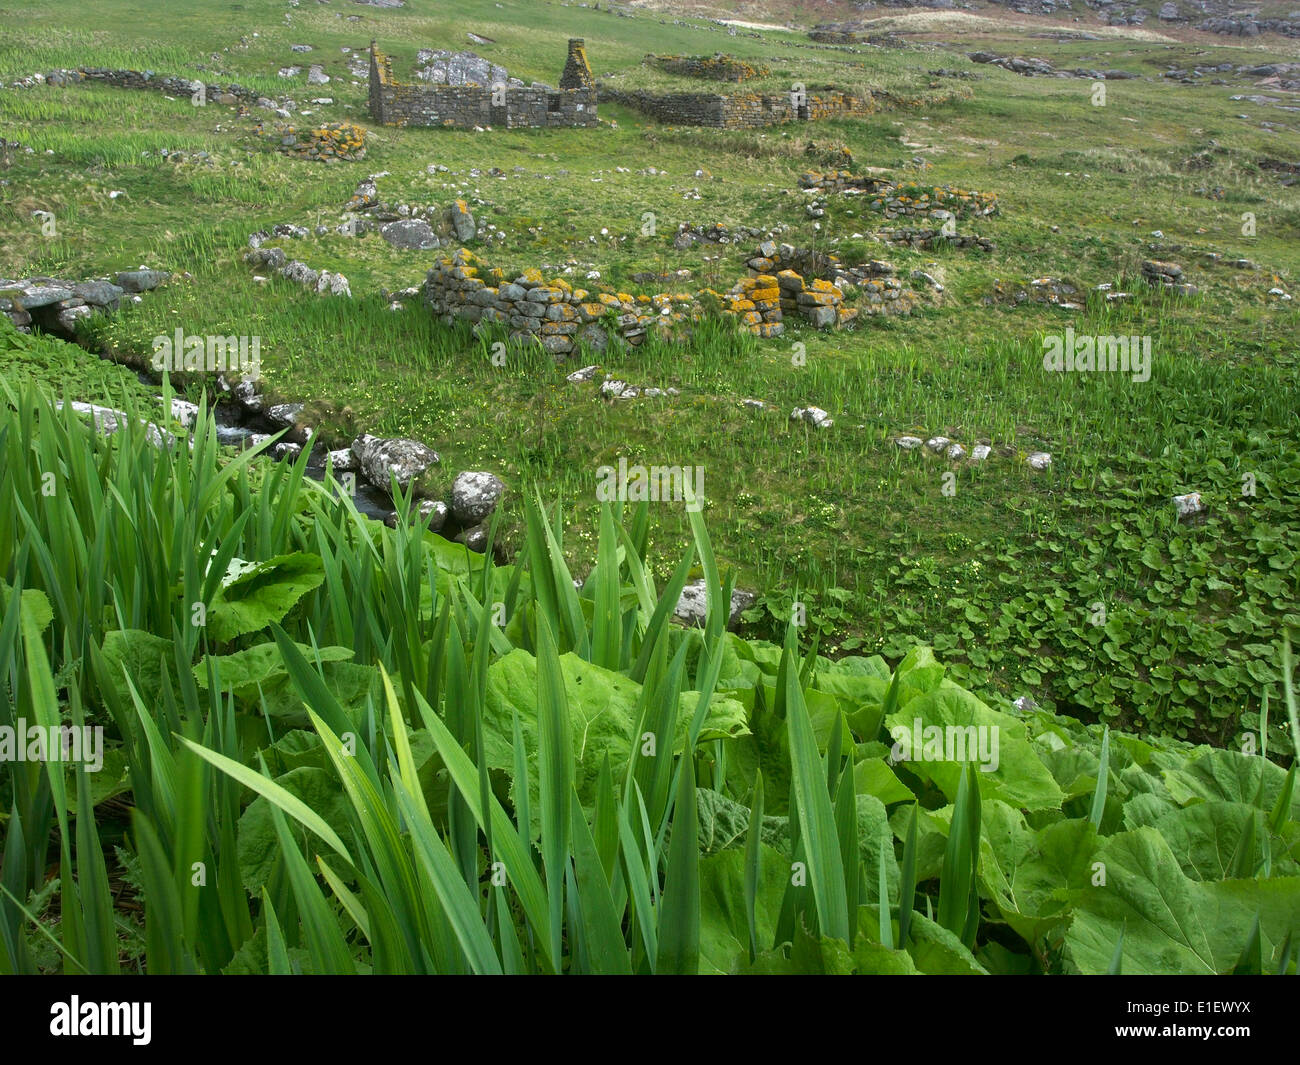 ruined buildings in deserted village, Mingulay, Outer Hebrides, Scotland Stock Photo